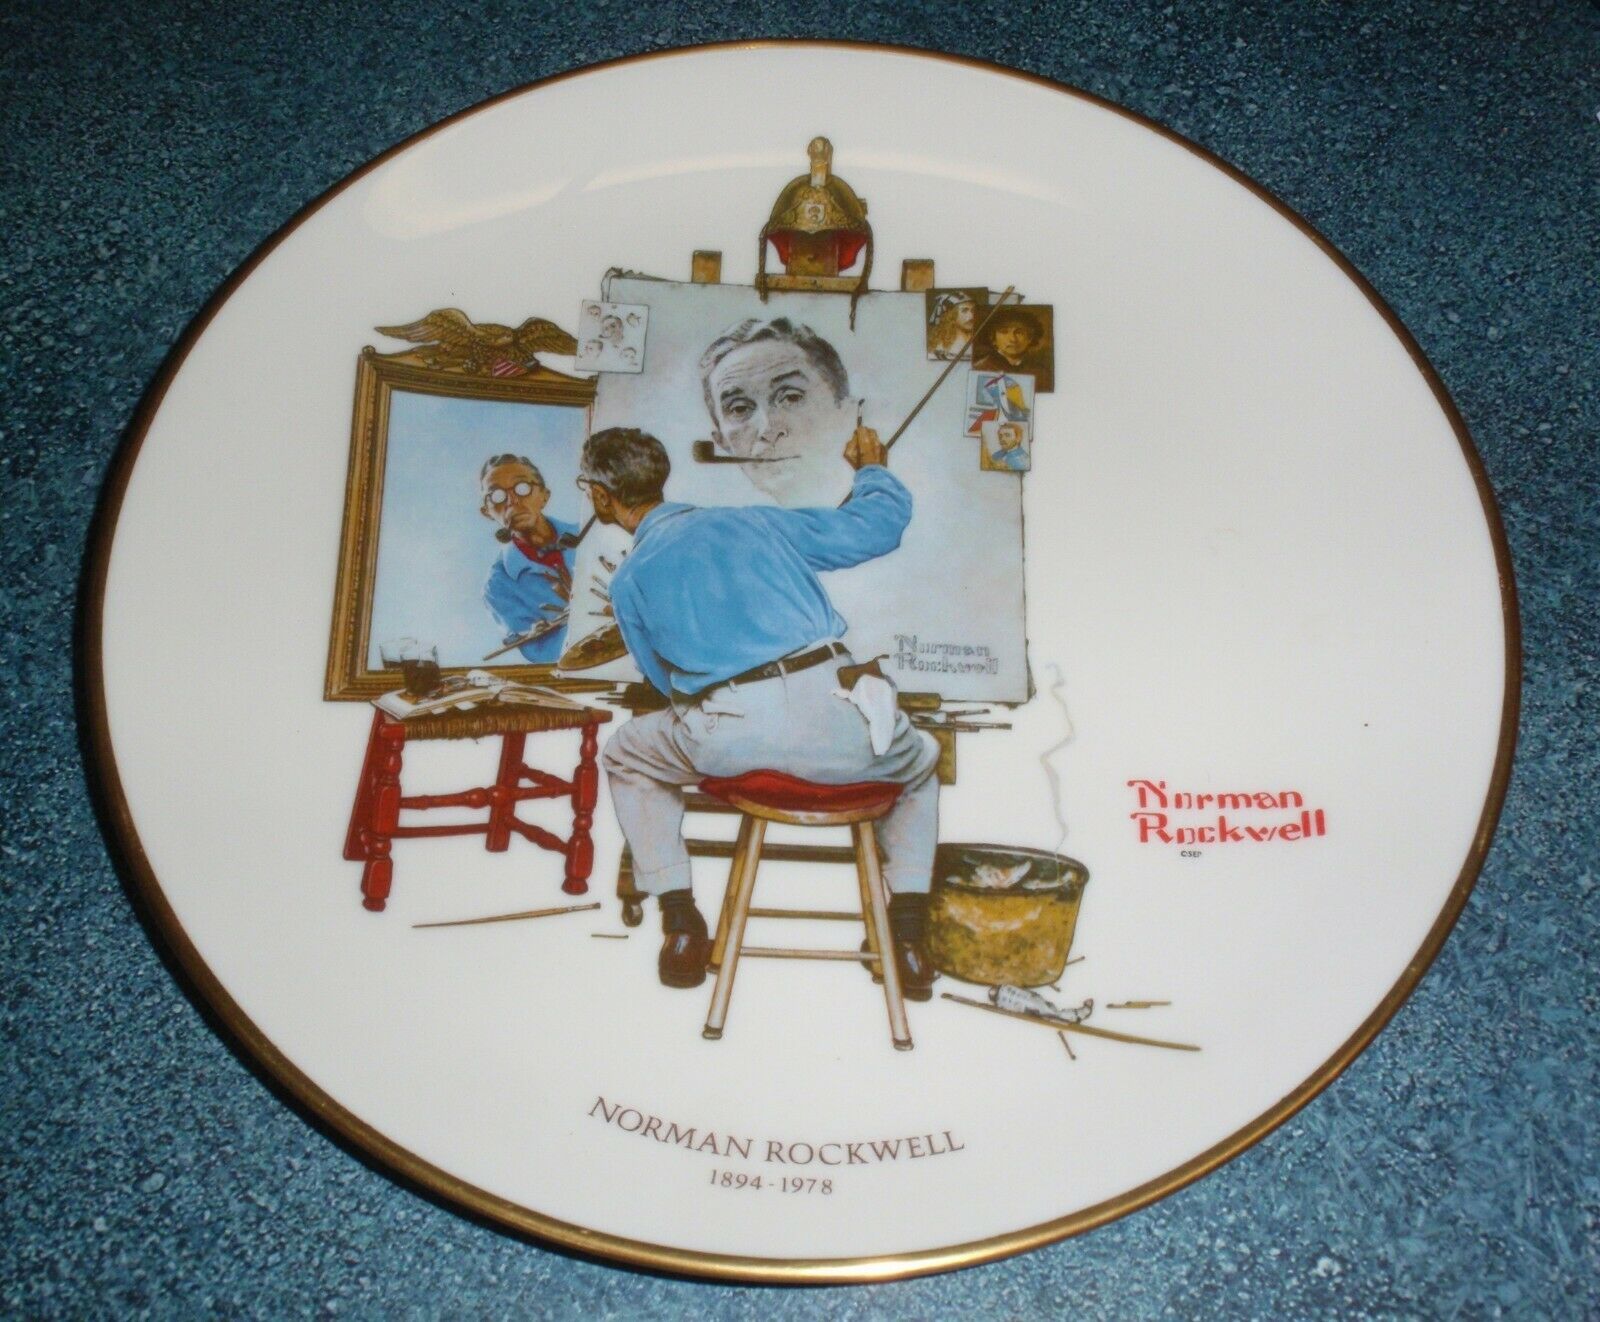 Vintage 1978 Norman Rockwell "Triple Self Portrait" Gorham Collectible Plate! - $8.72